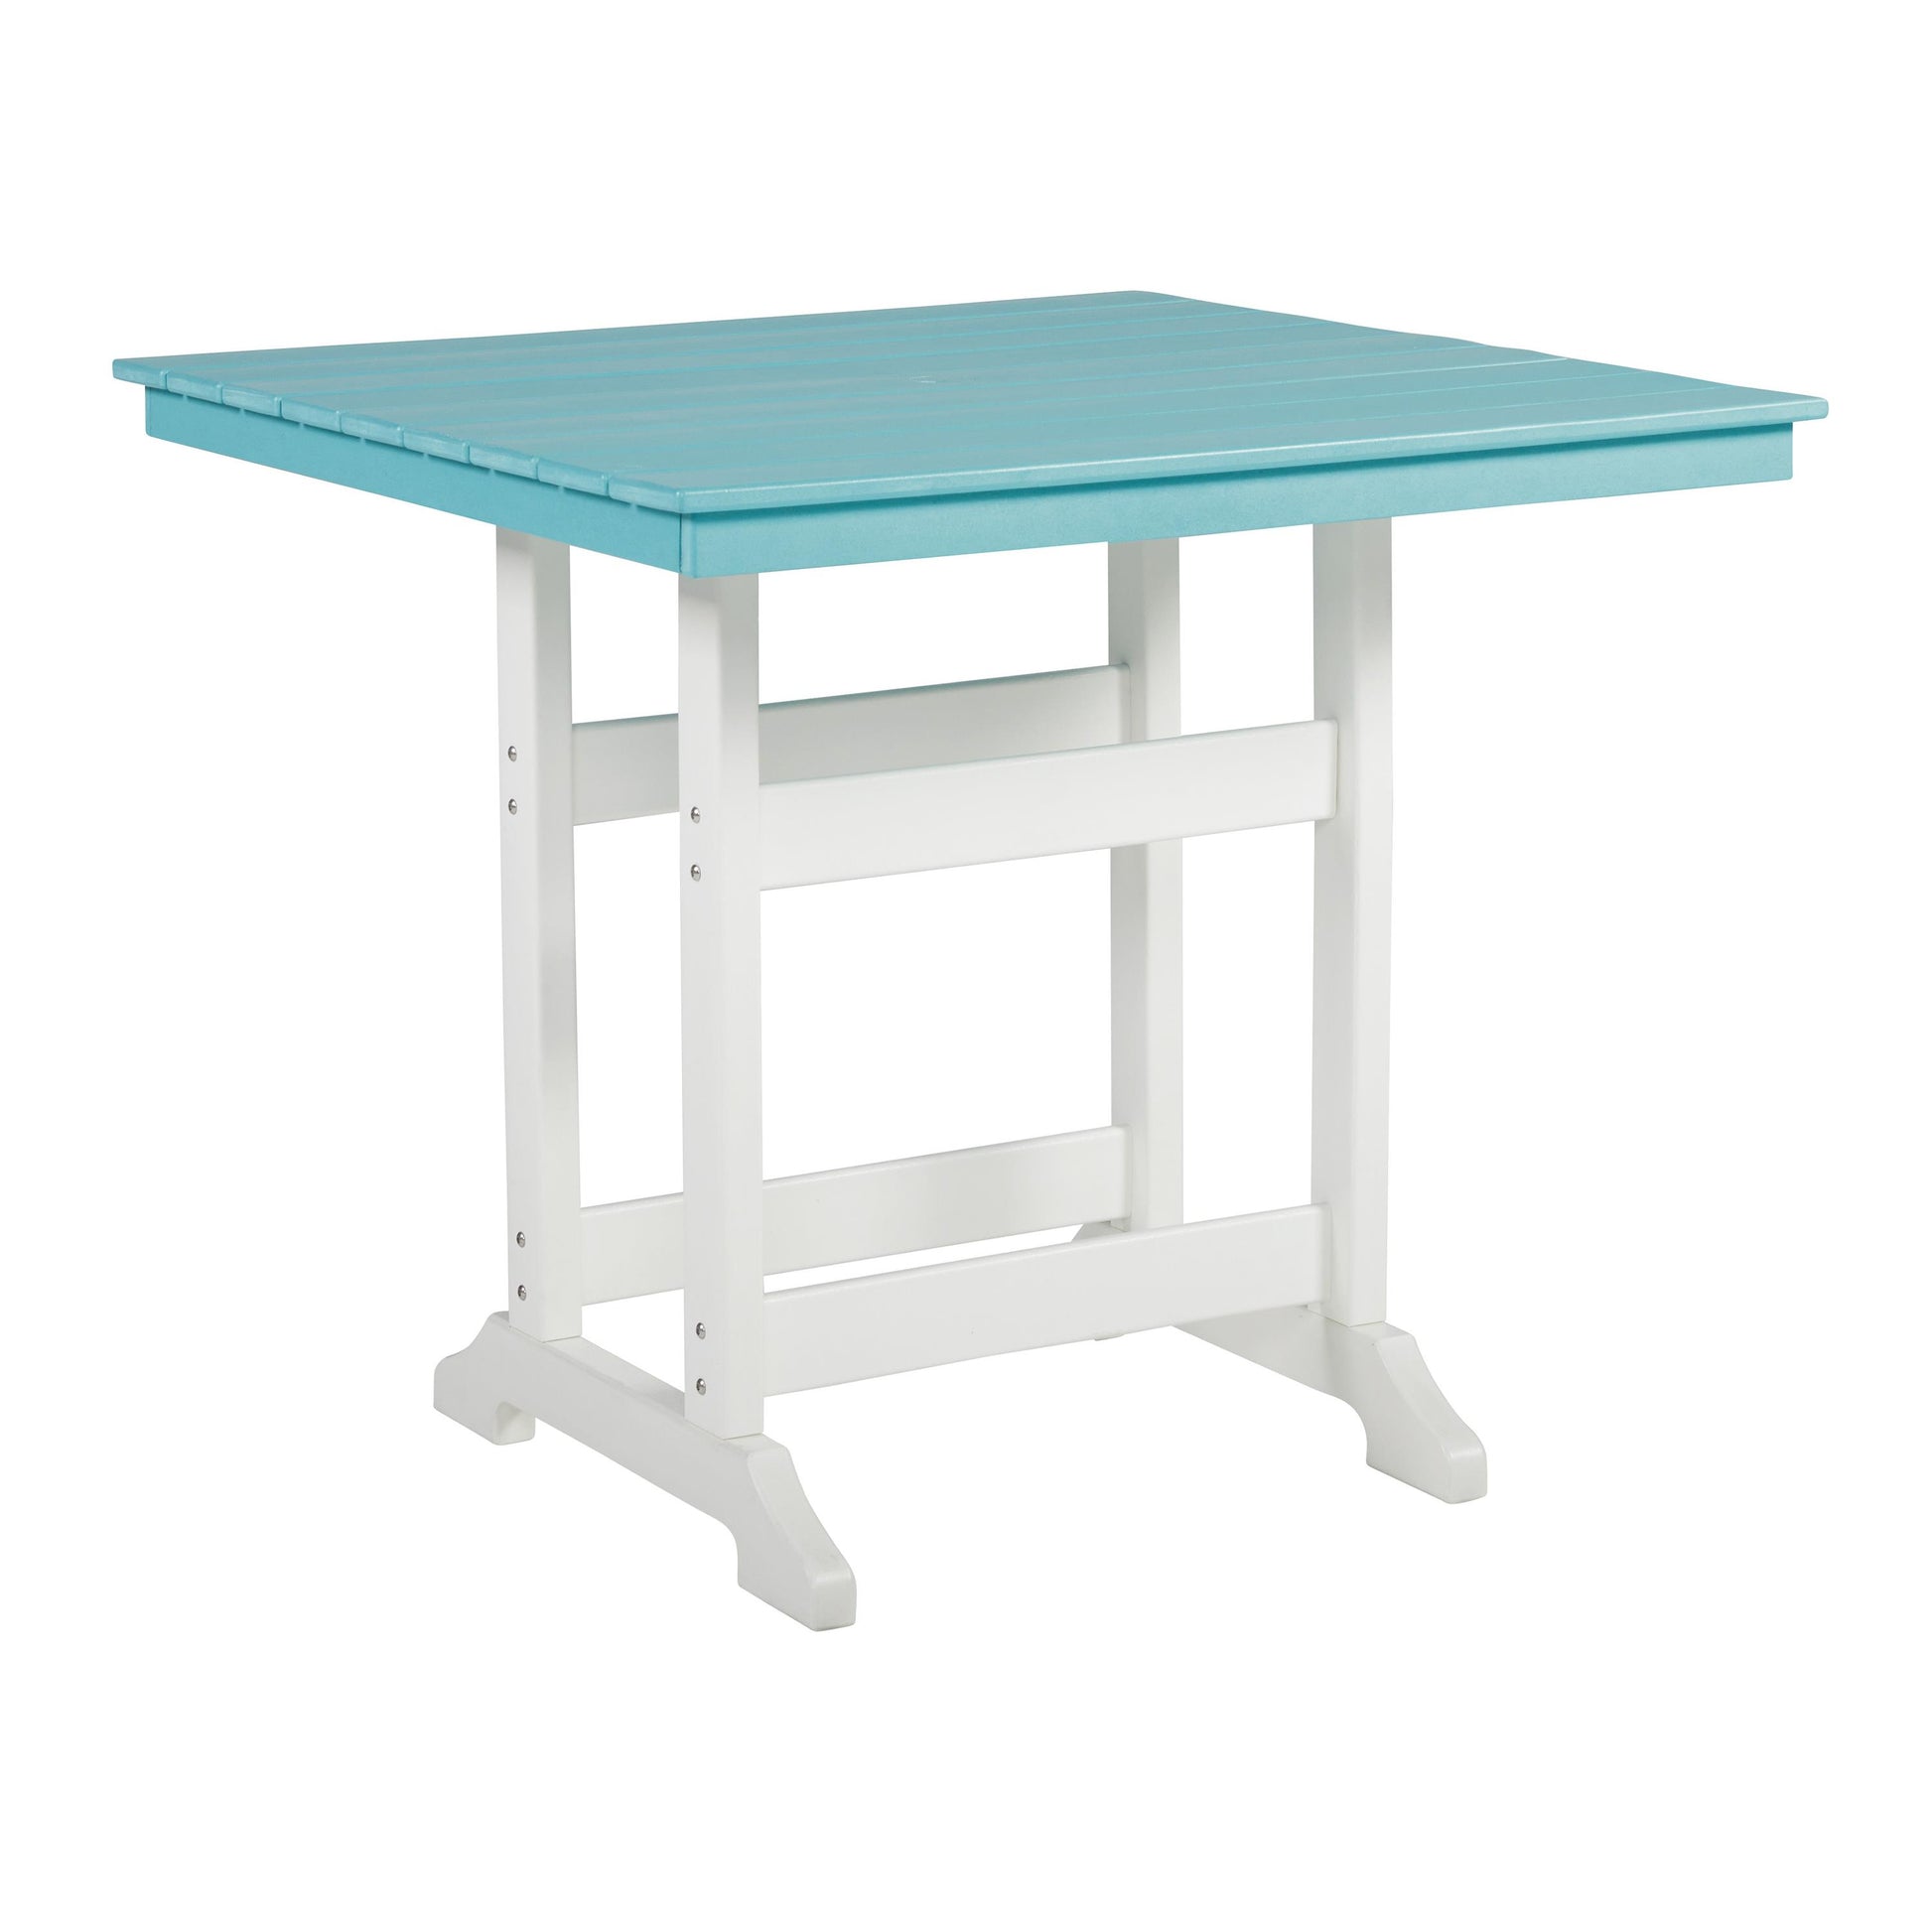 Signature Design by Ashley Outdoor Tables Counter Height Tables P208-632 IMAGE 1